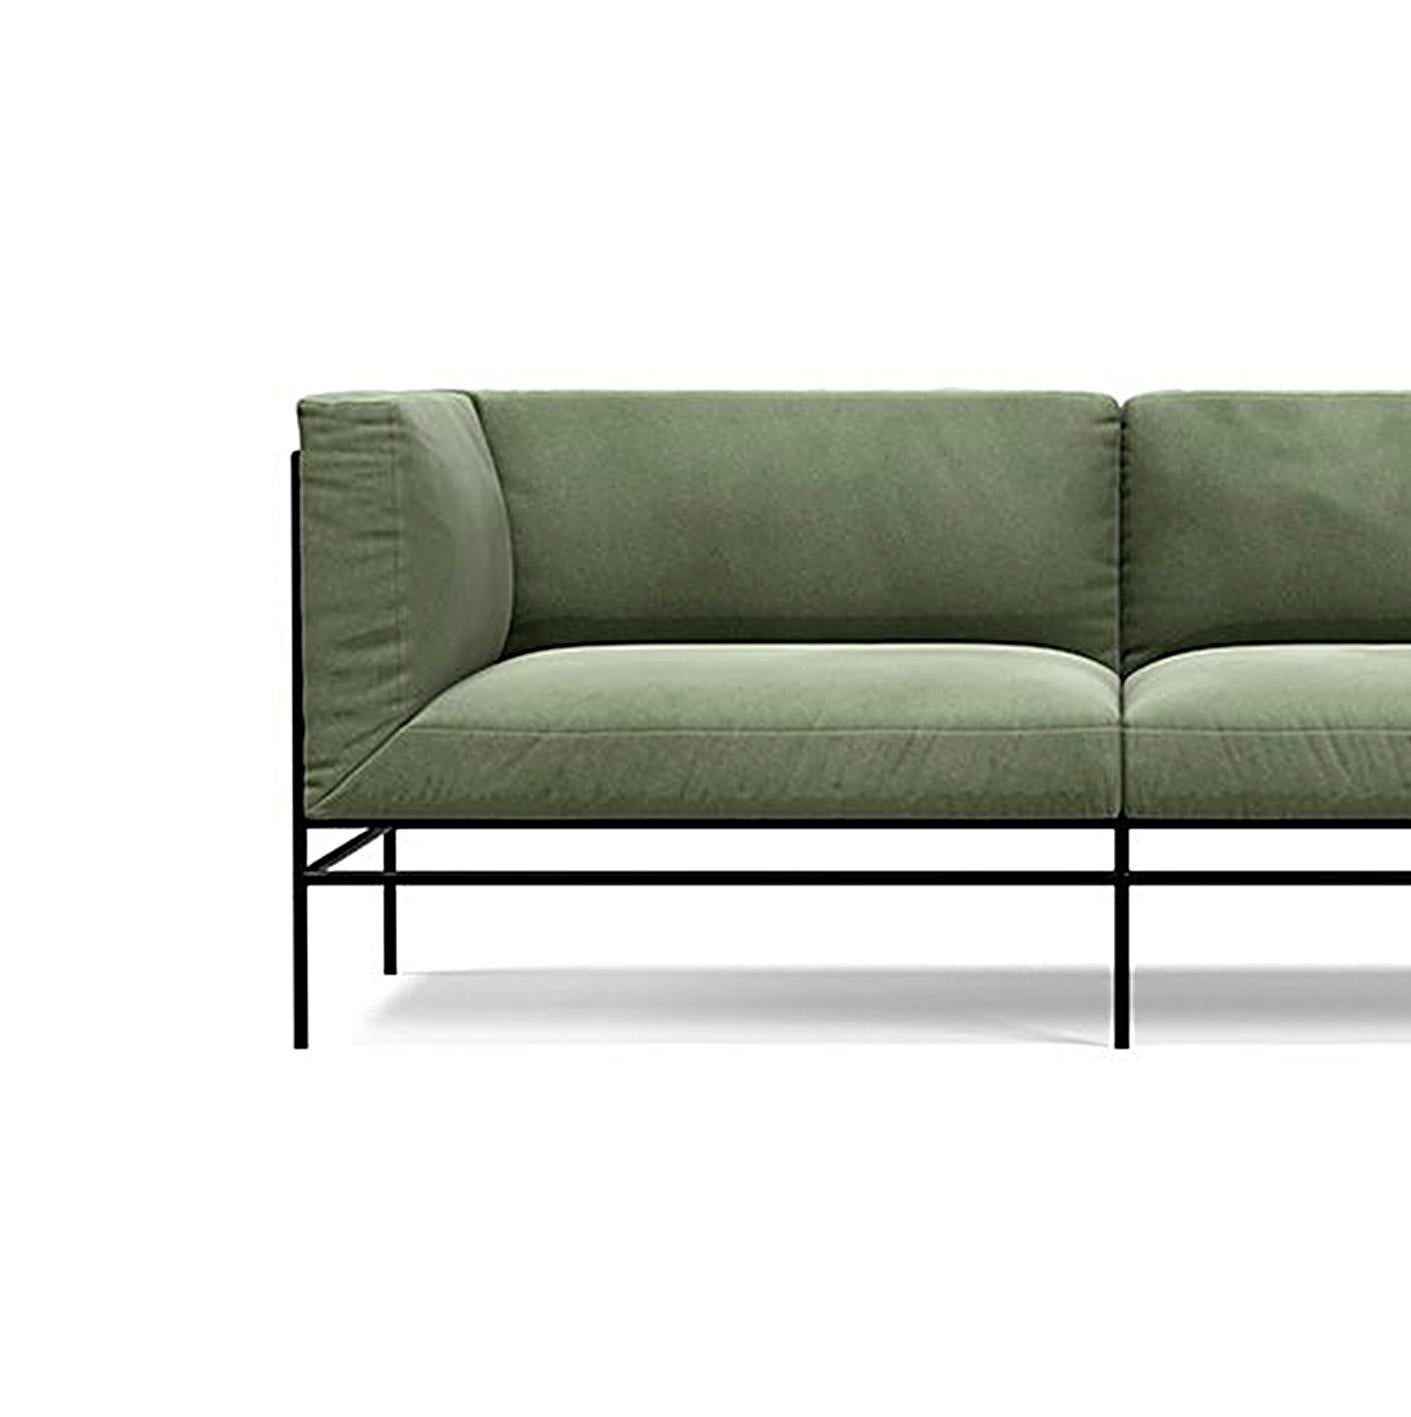 'Middleweight' two seater by Michael Anastassiades for Karakter

Middleweight is Michael Anastassiades’ very first upholstered piece of furniture. The piece captures the best of two worlds, the Italian super lounge sofa on one side and the compact